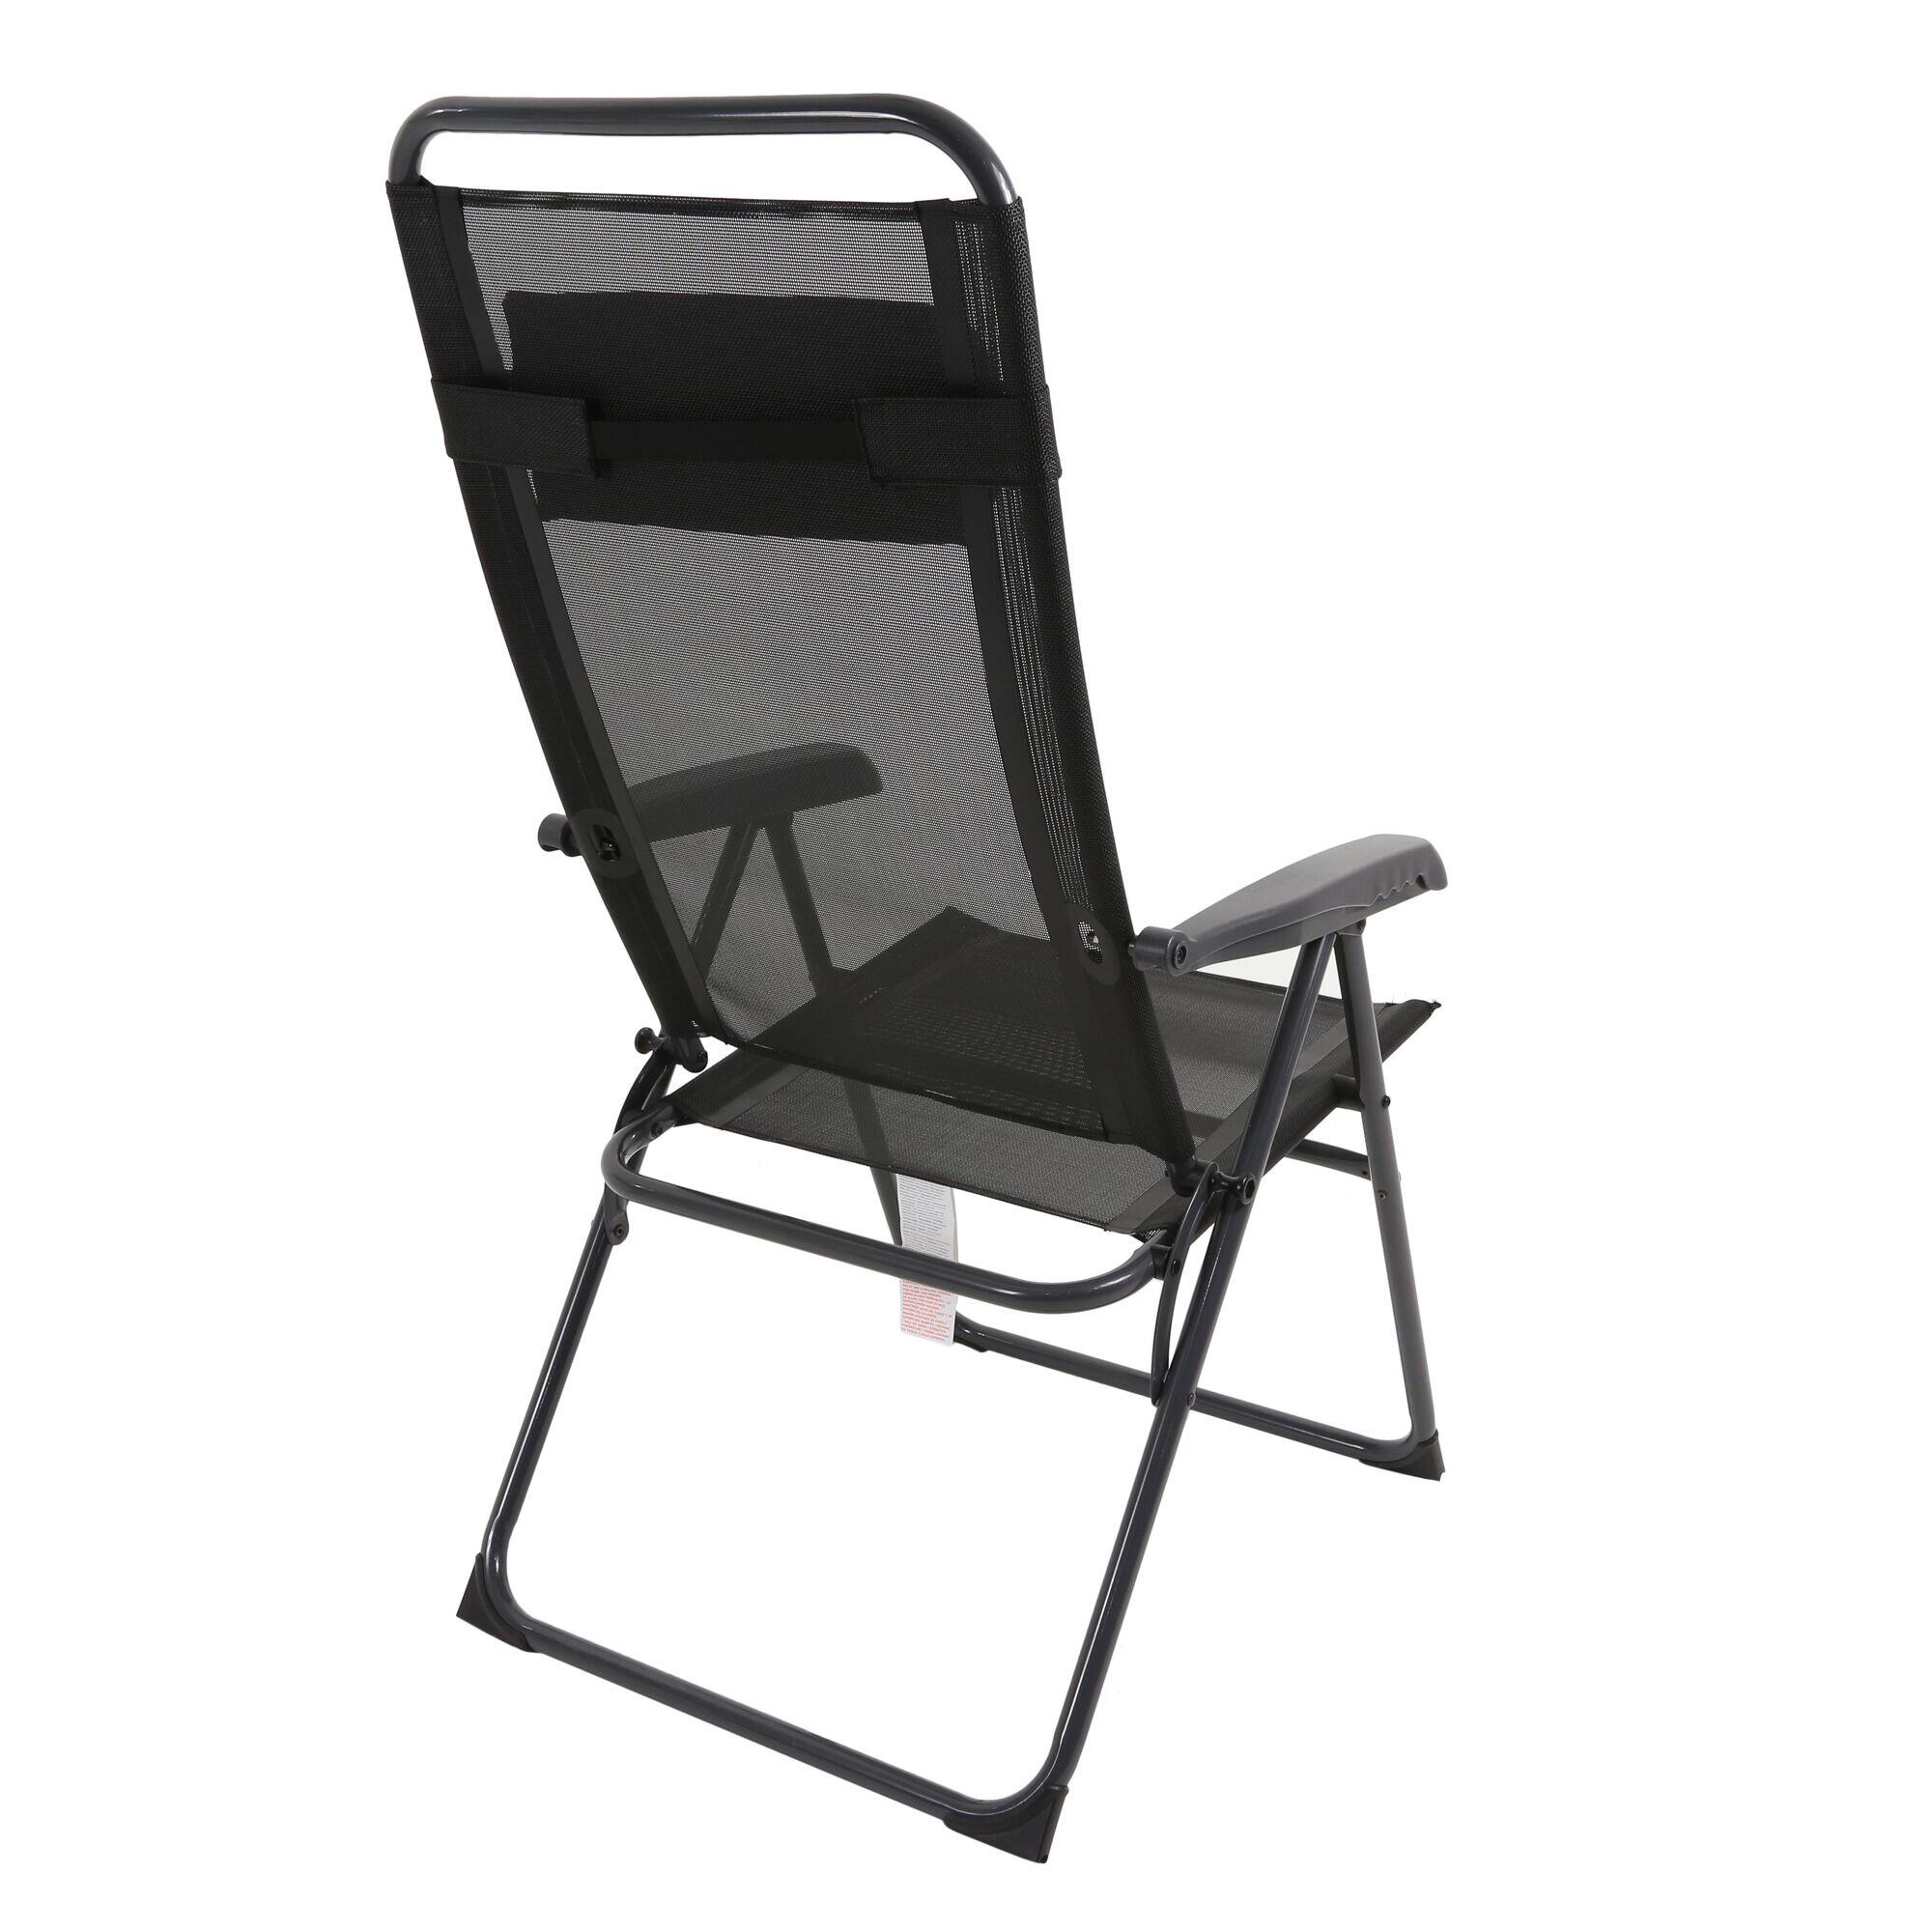 Colico Adults' Camping Chair - Black 3/5